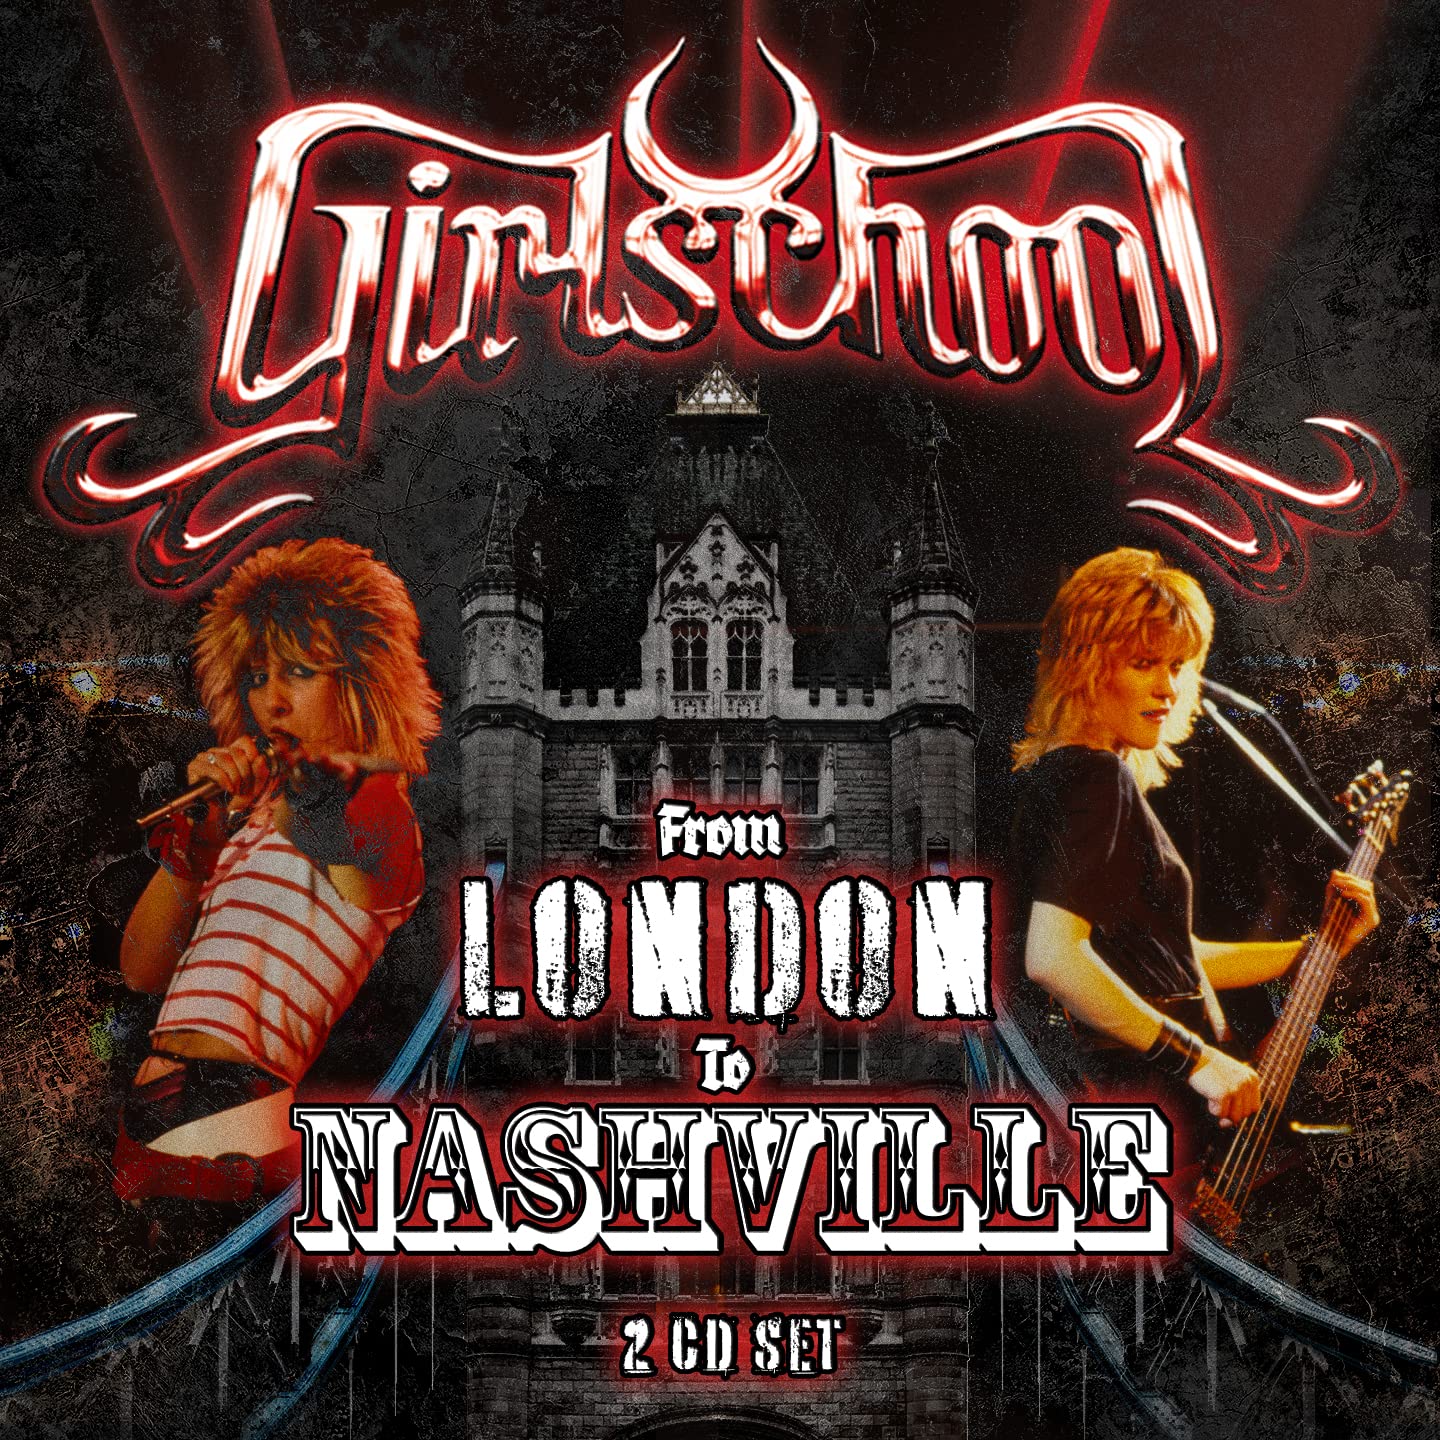 Girlschool - From London To Nashville (2021) FLAC Download